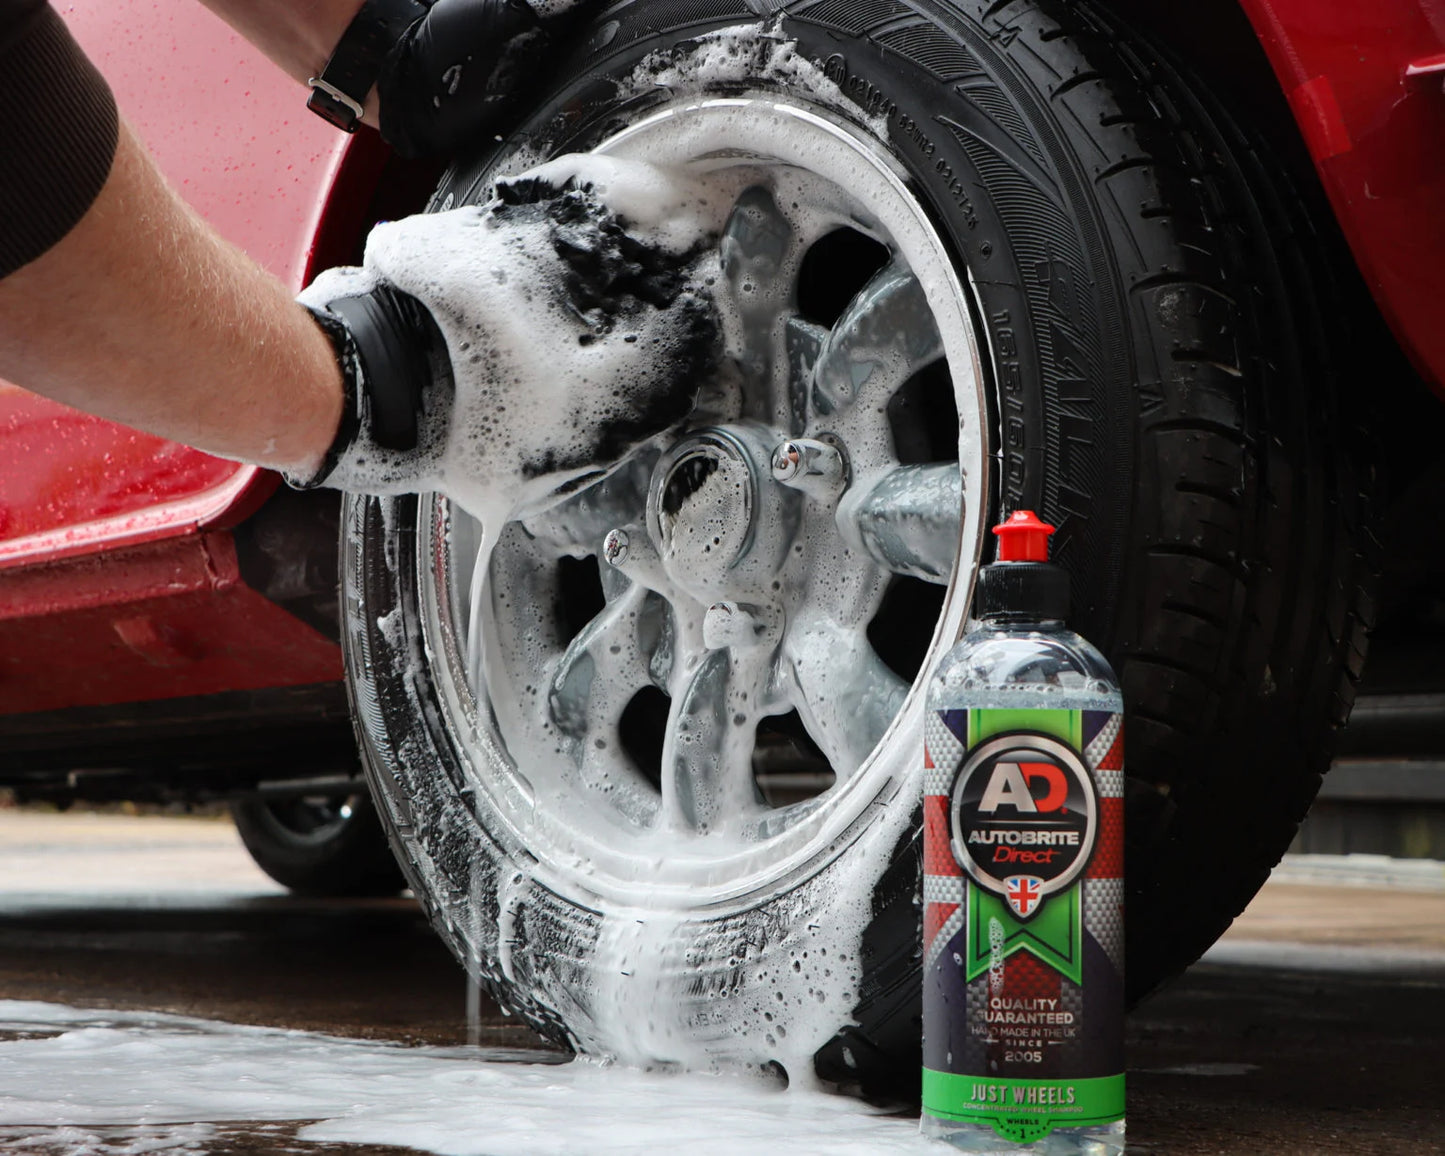 Autobrite Direct | Just Wheels Concentrated Wheel Shampoo